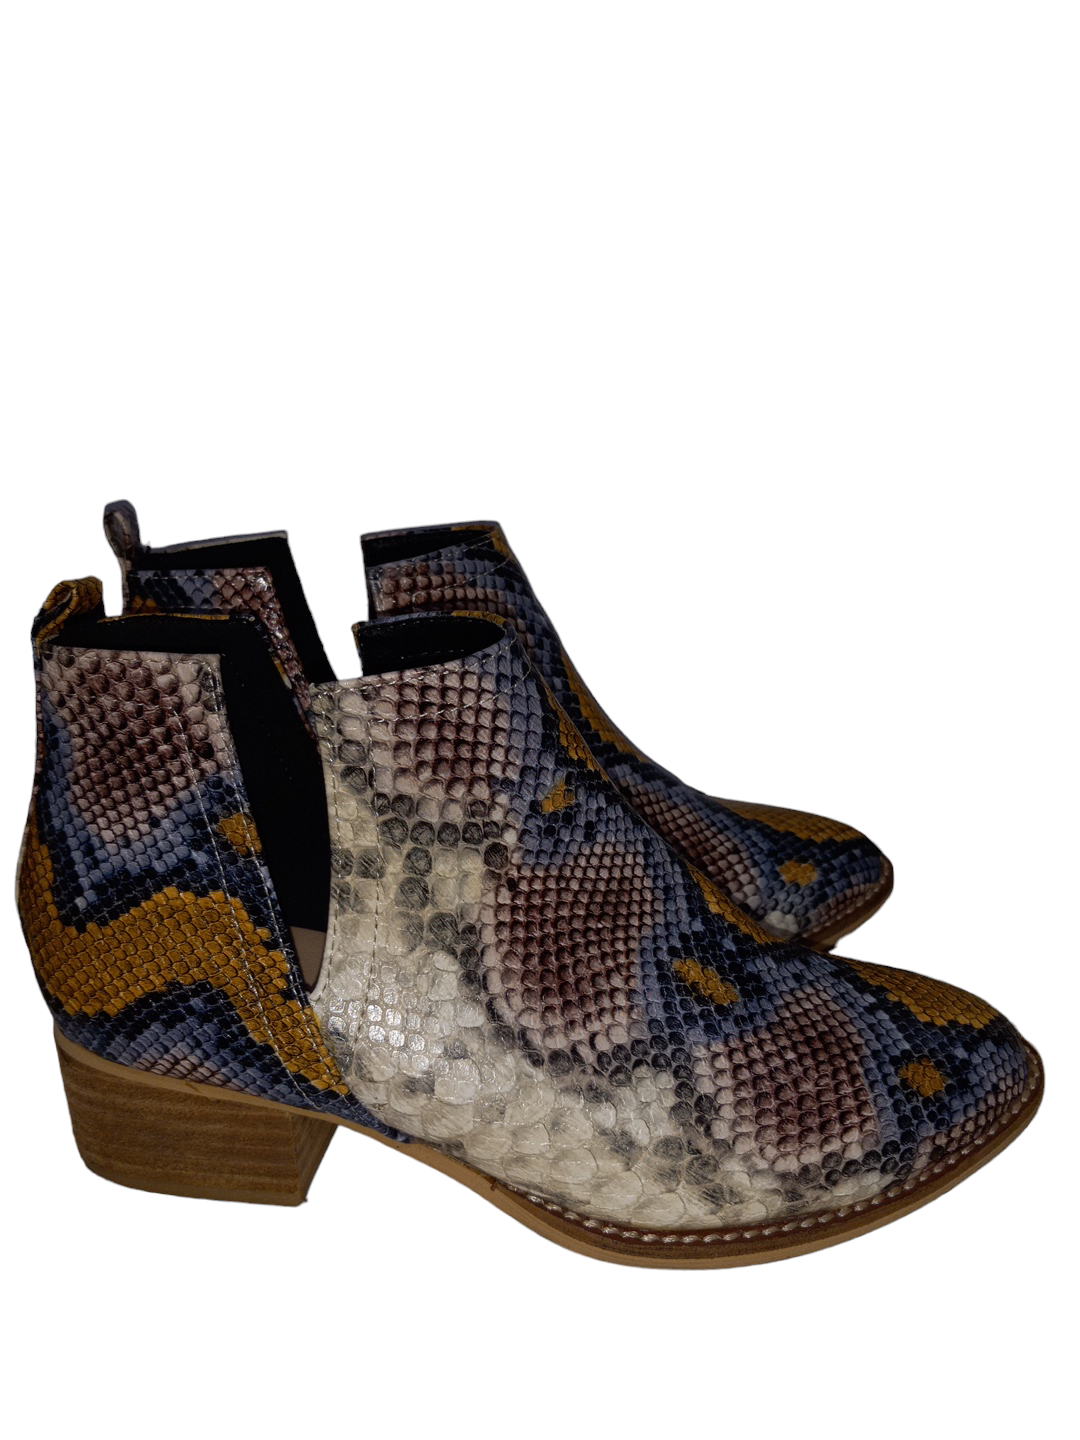 Snakeskin Print Boots Ankle Heels Clothes Mentor, Size 6